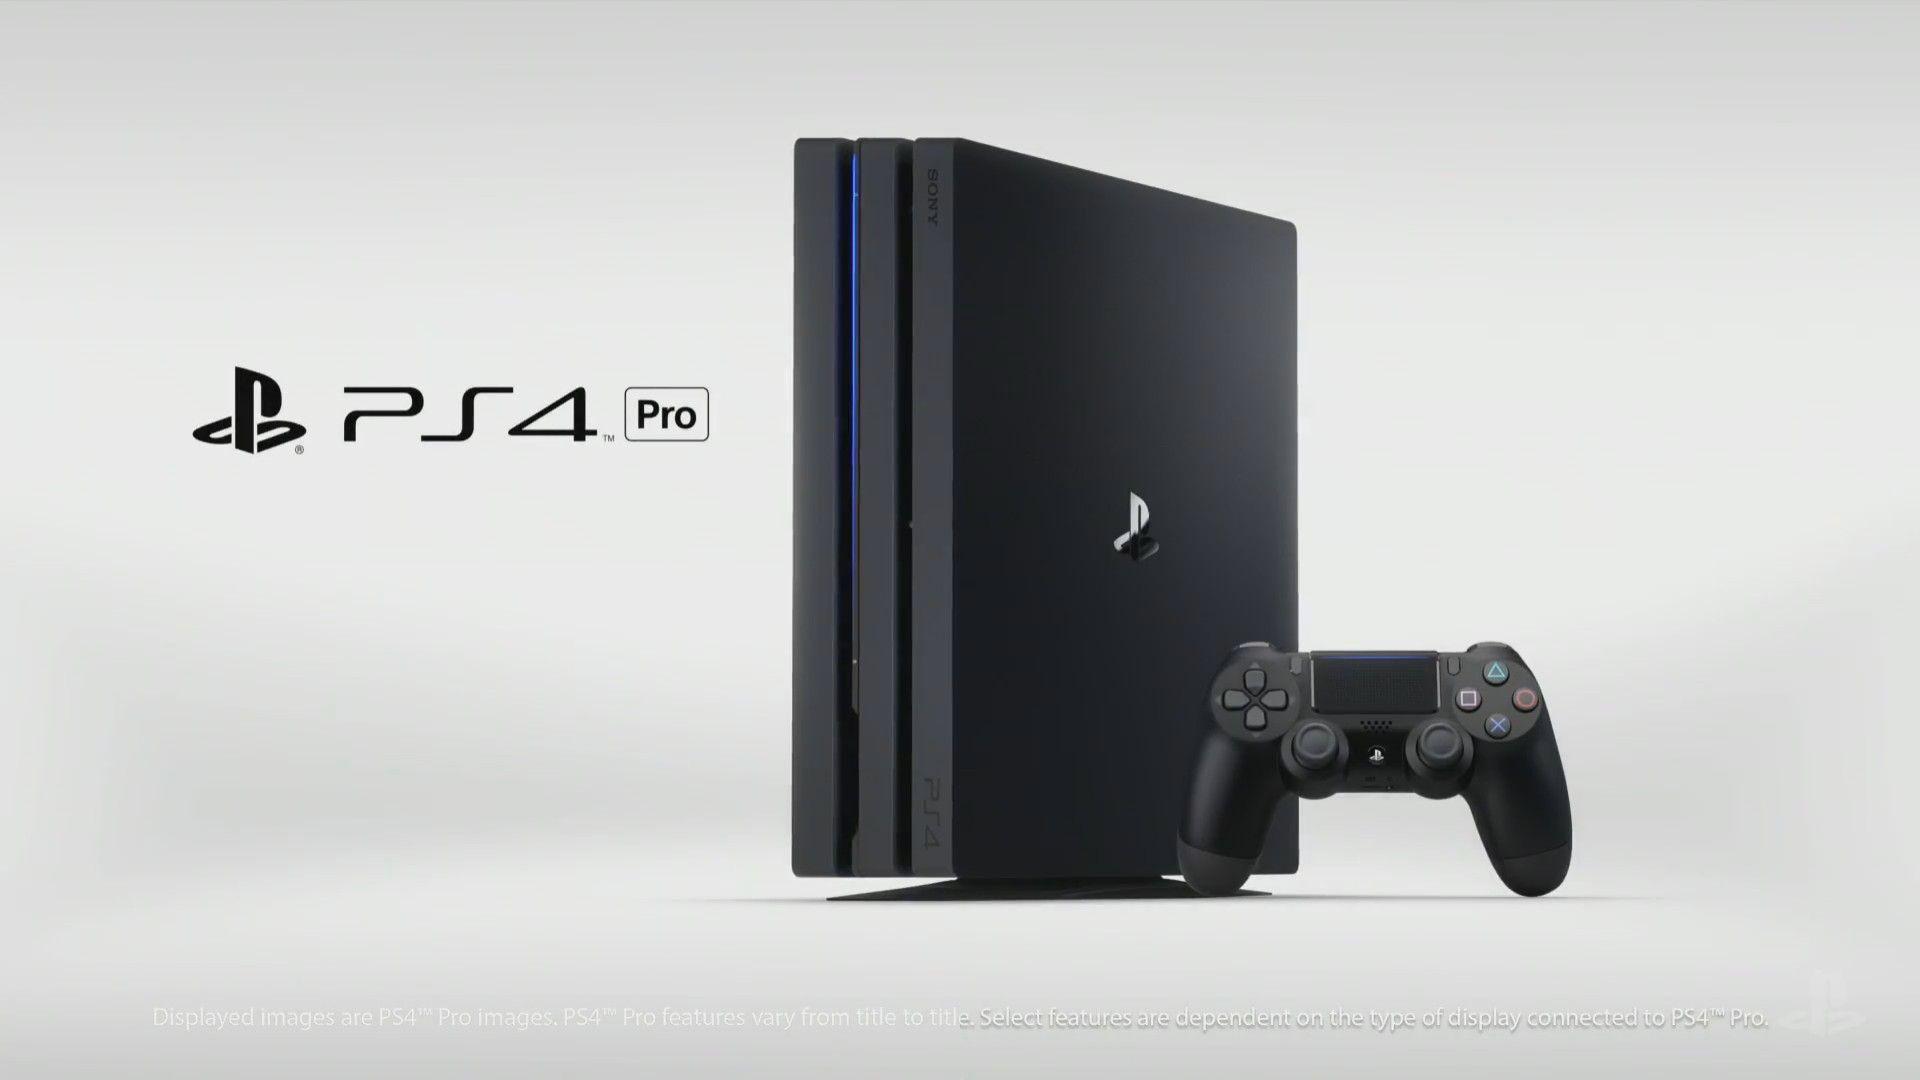 PS4 Pro Wallpaper Free PS4 Pro Background